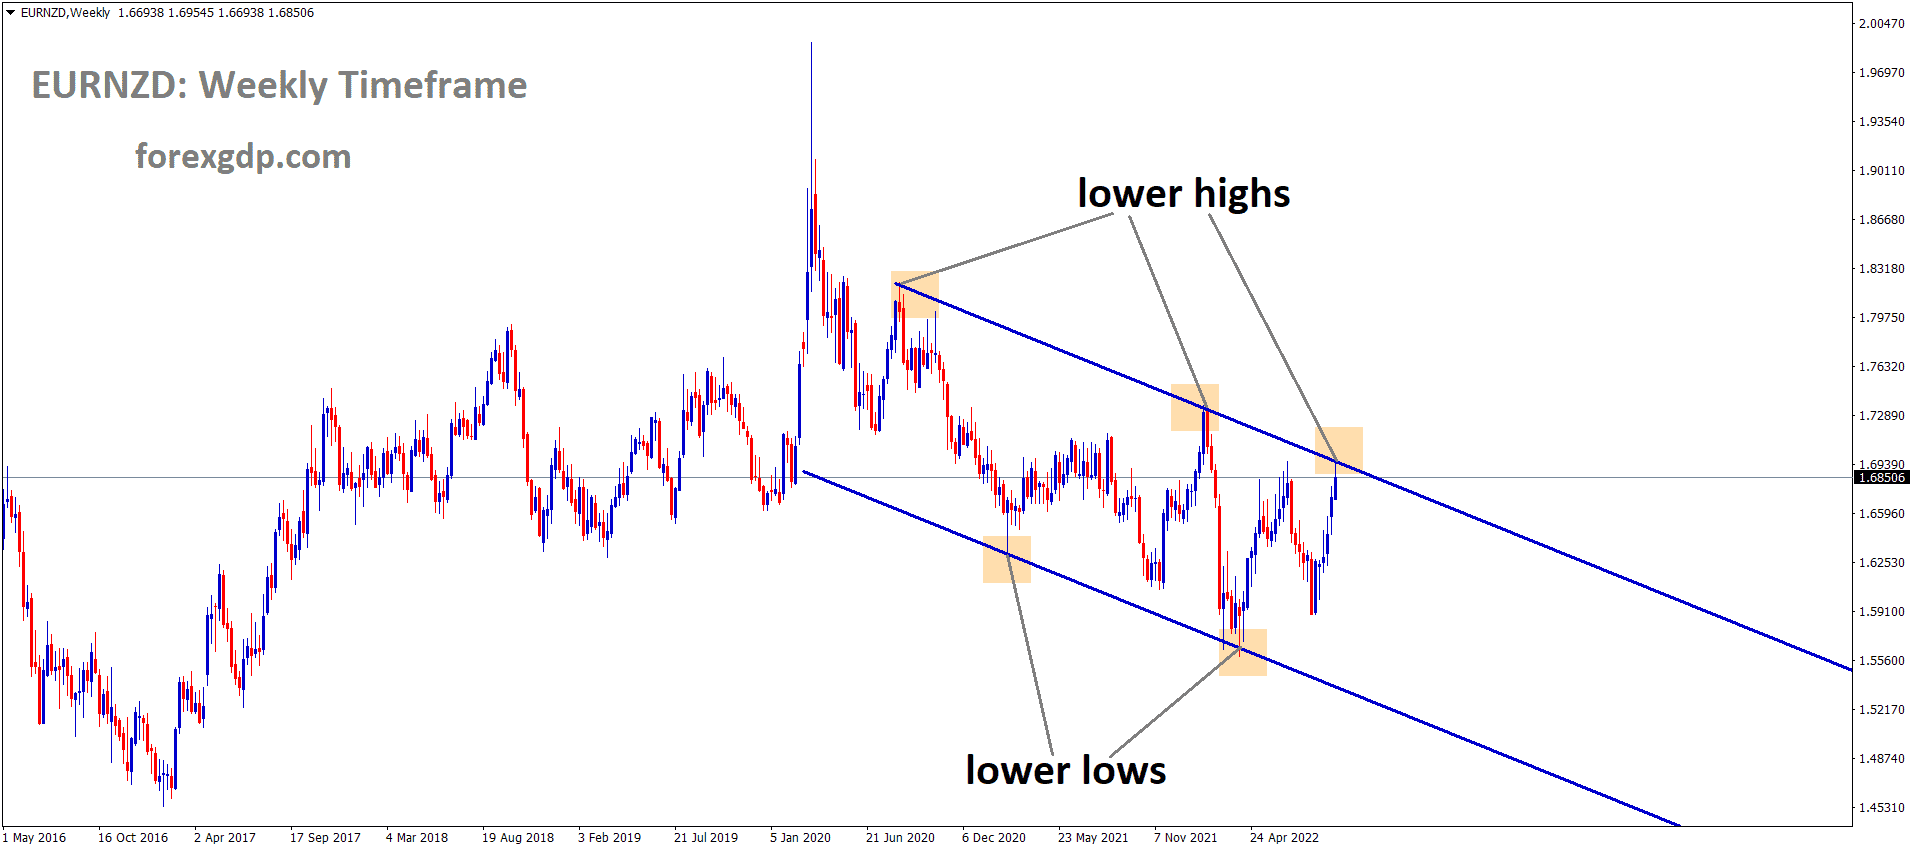 EURNZD is moving in the Descending channel and the market has reached the lower high area of the channel 1